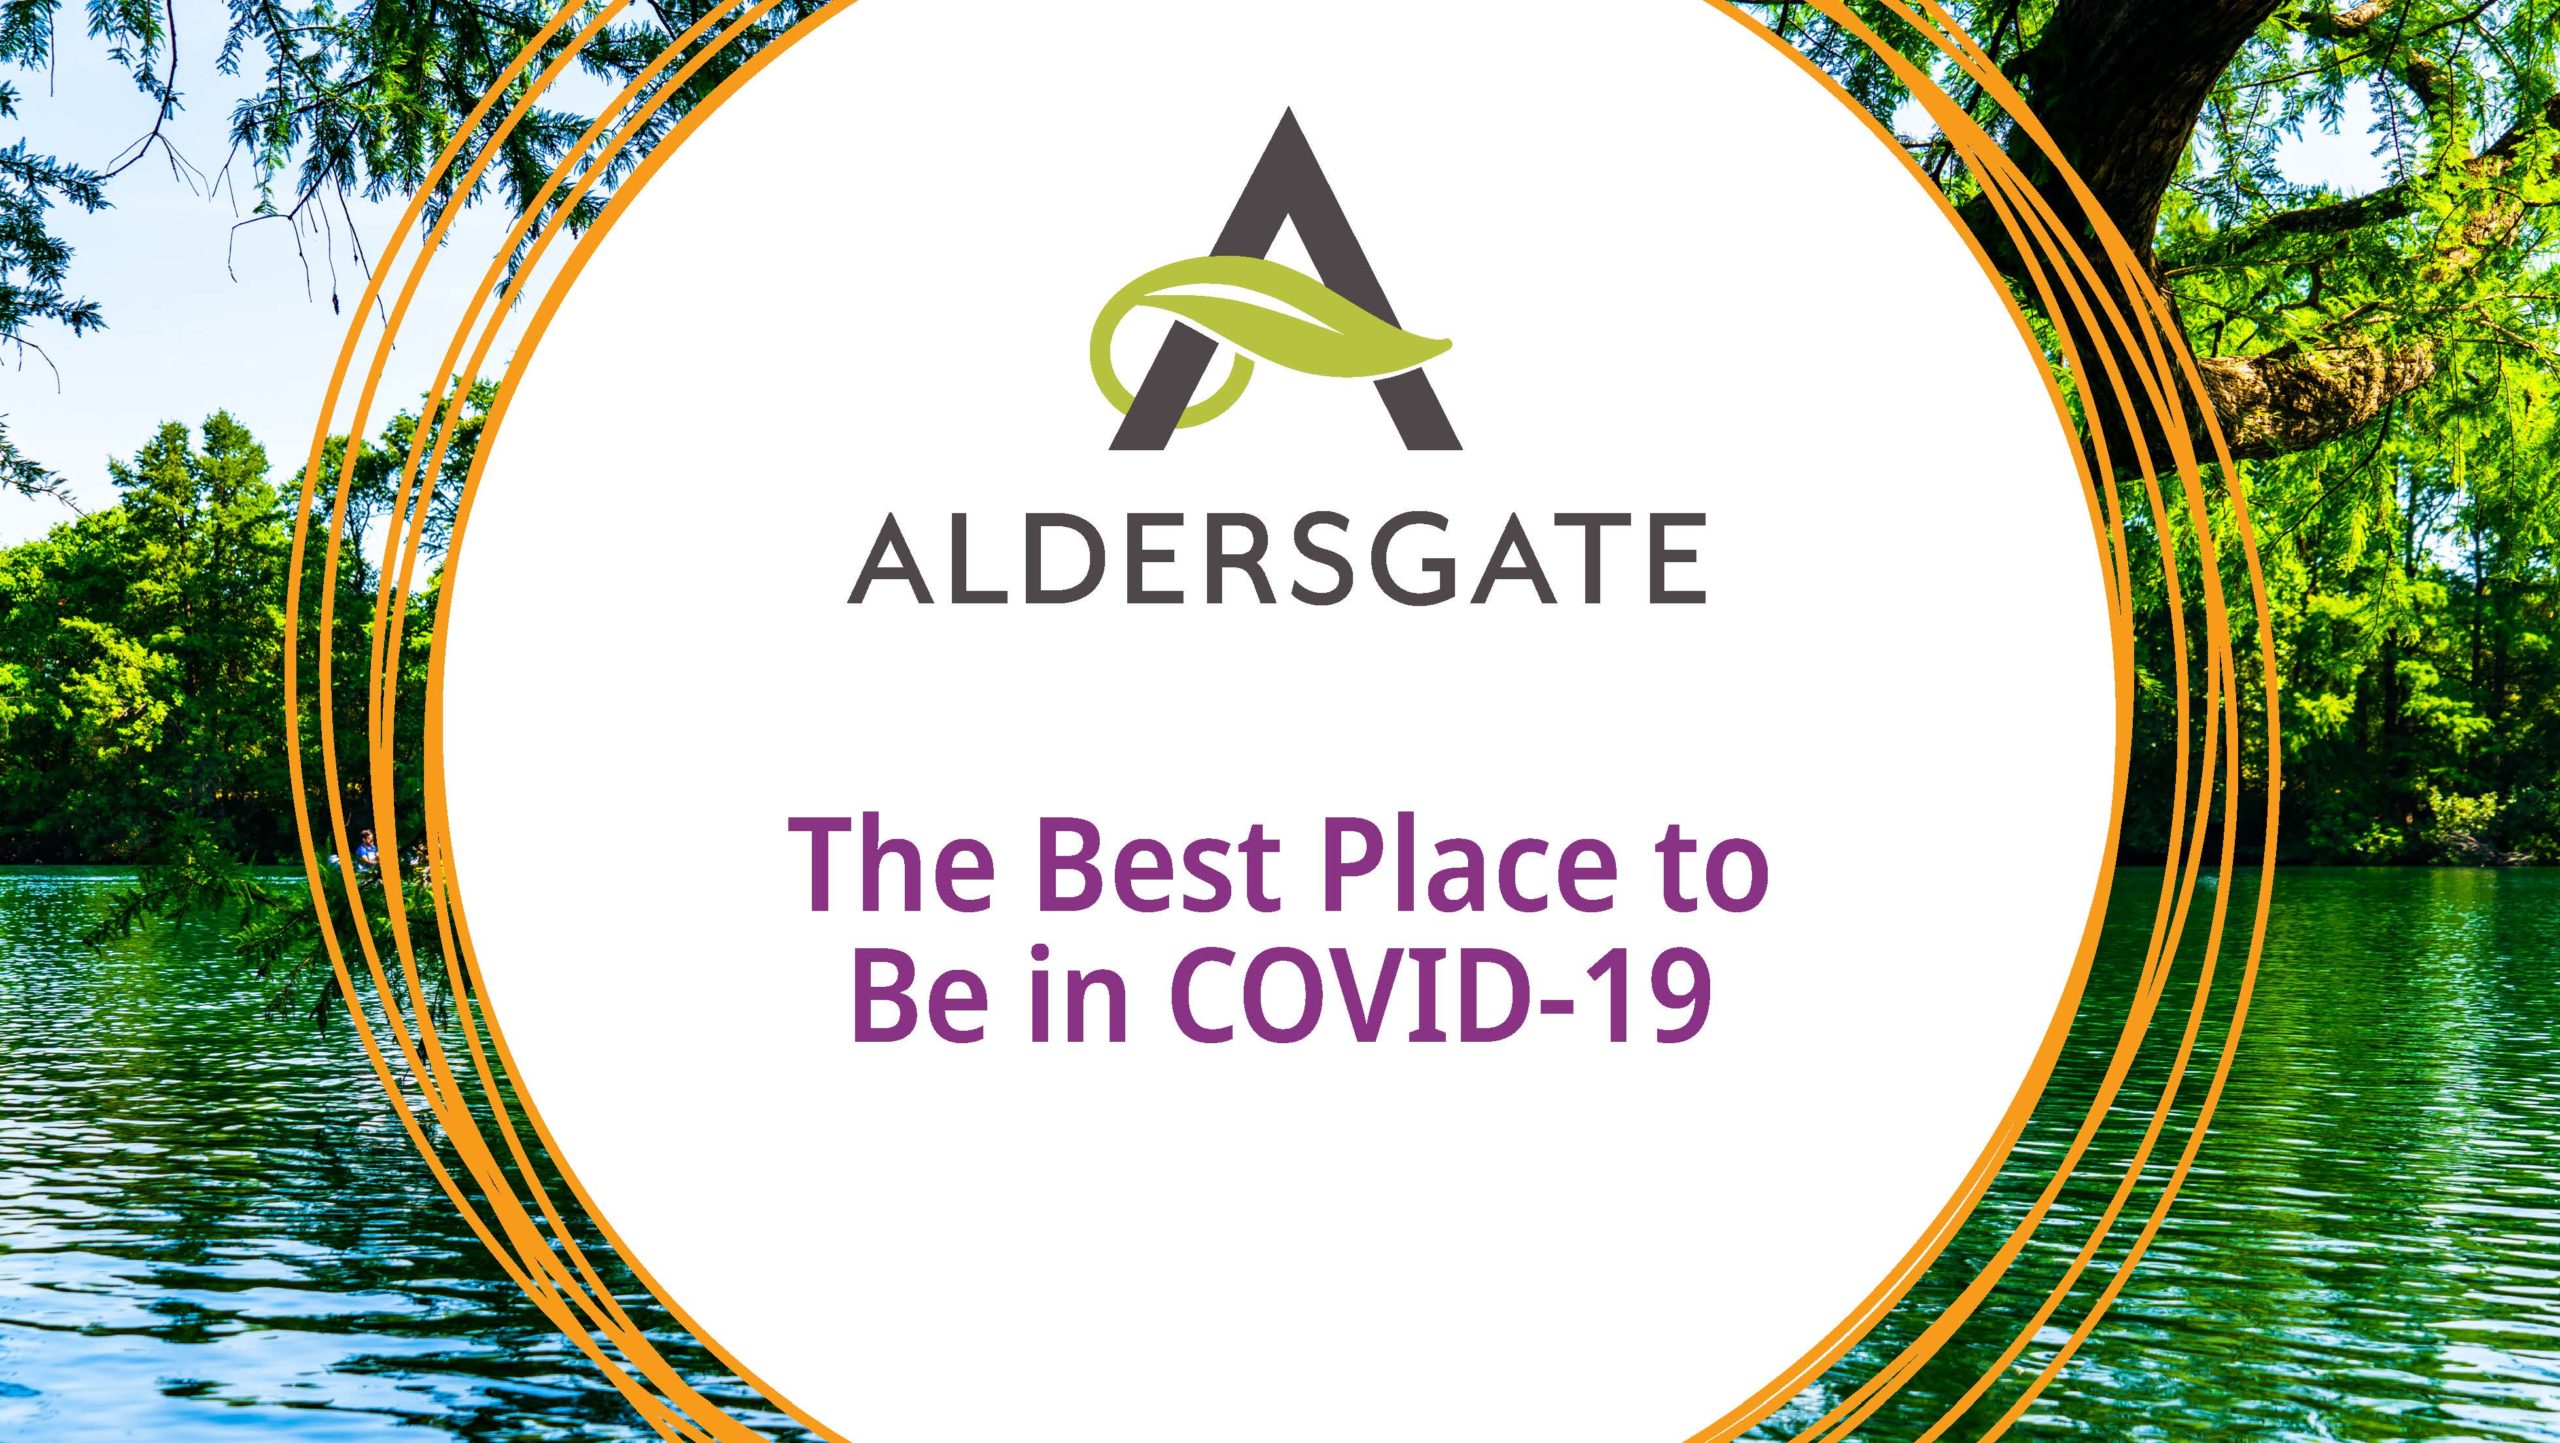 The best place to be in COVID-19 - Aldersgate Life Plan Community